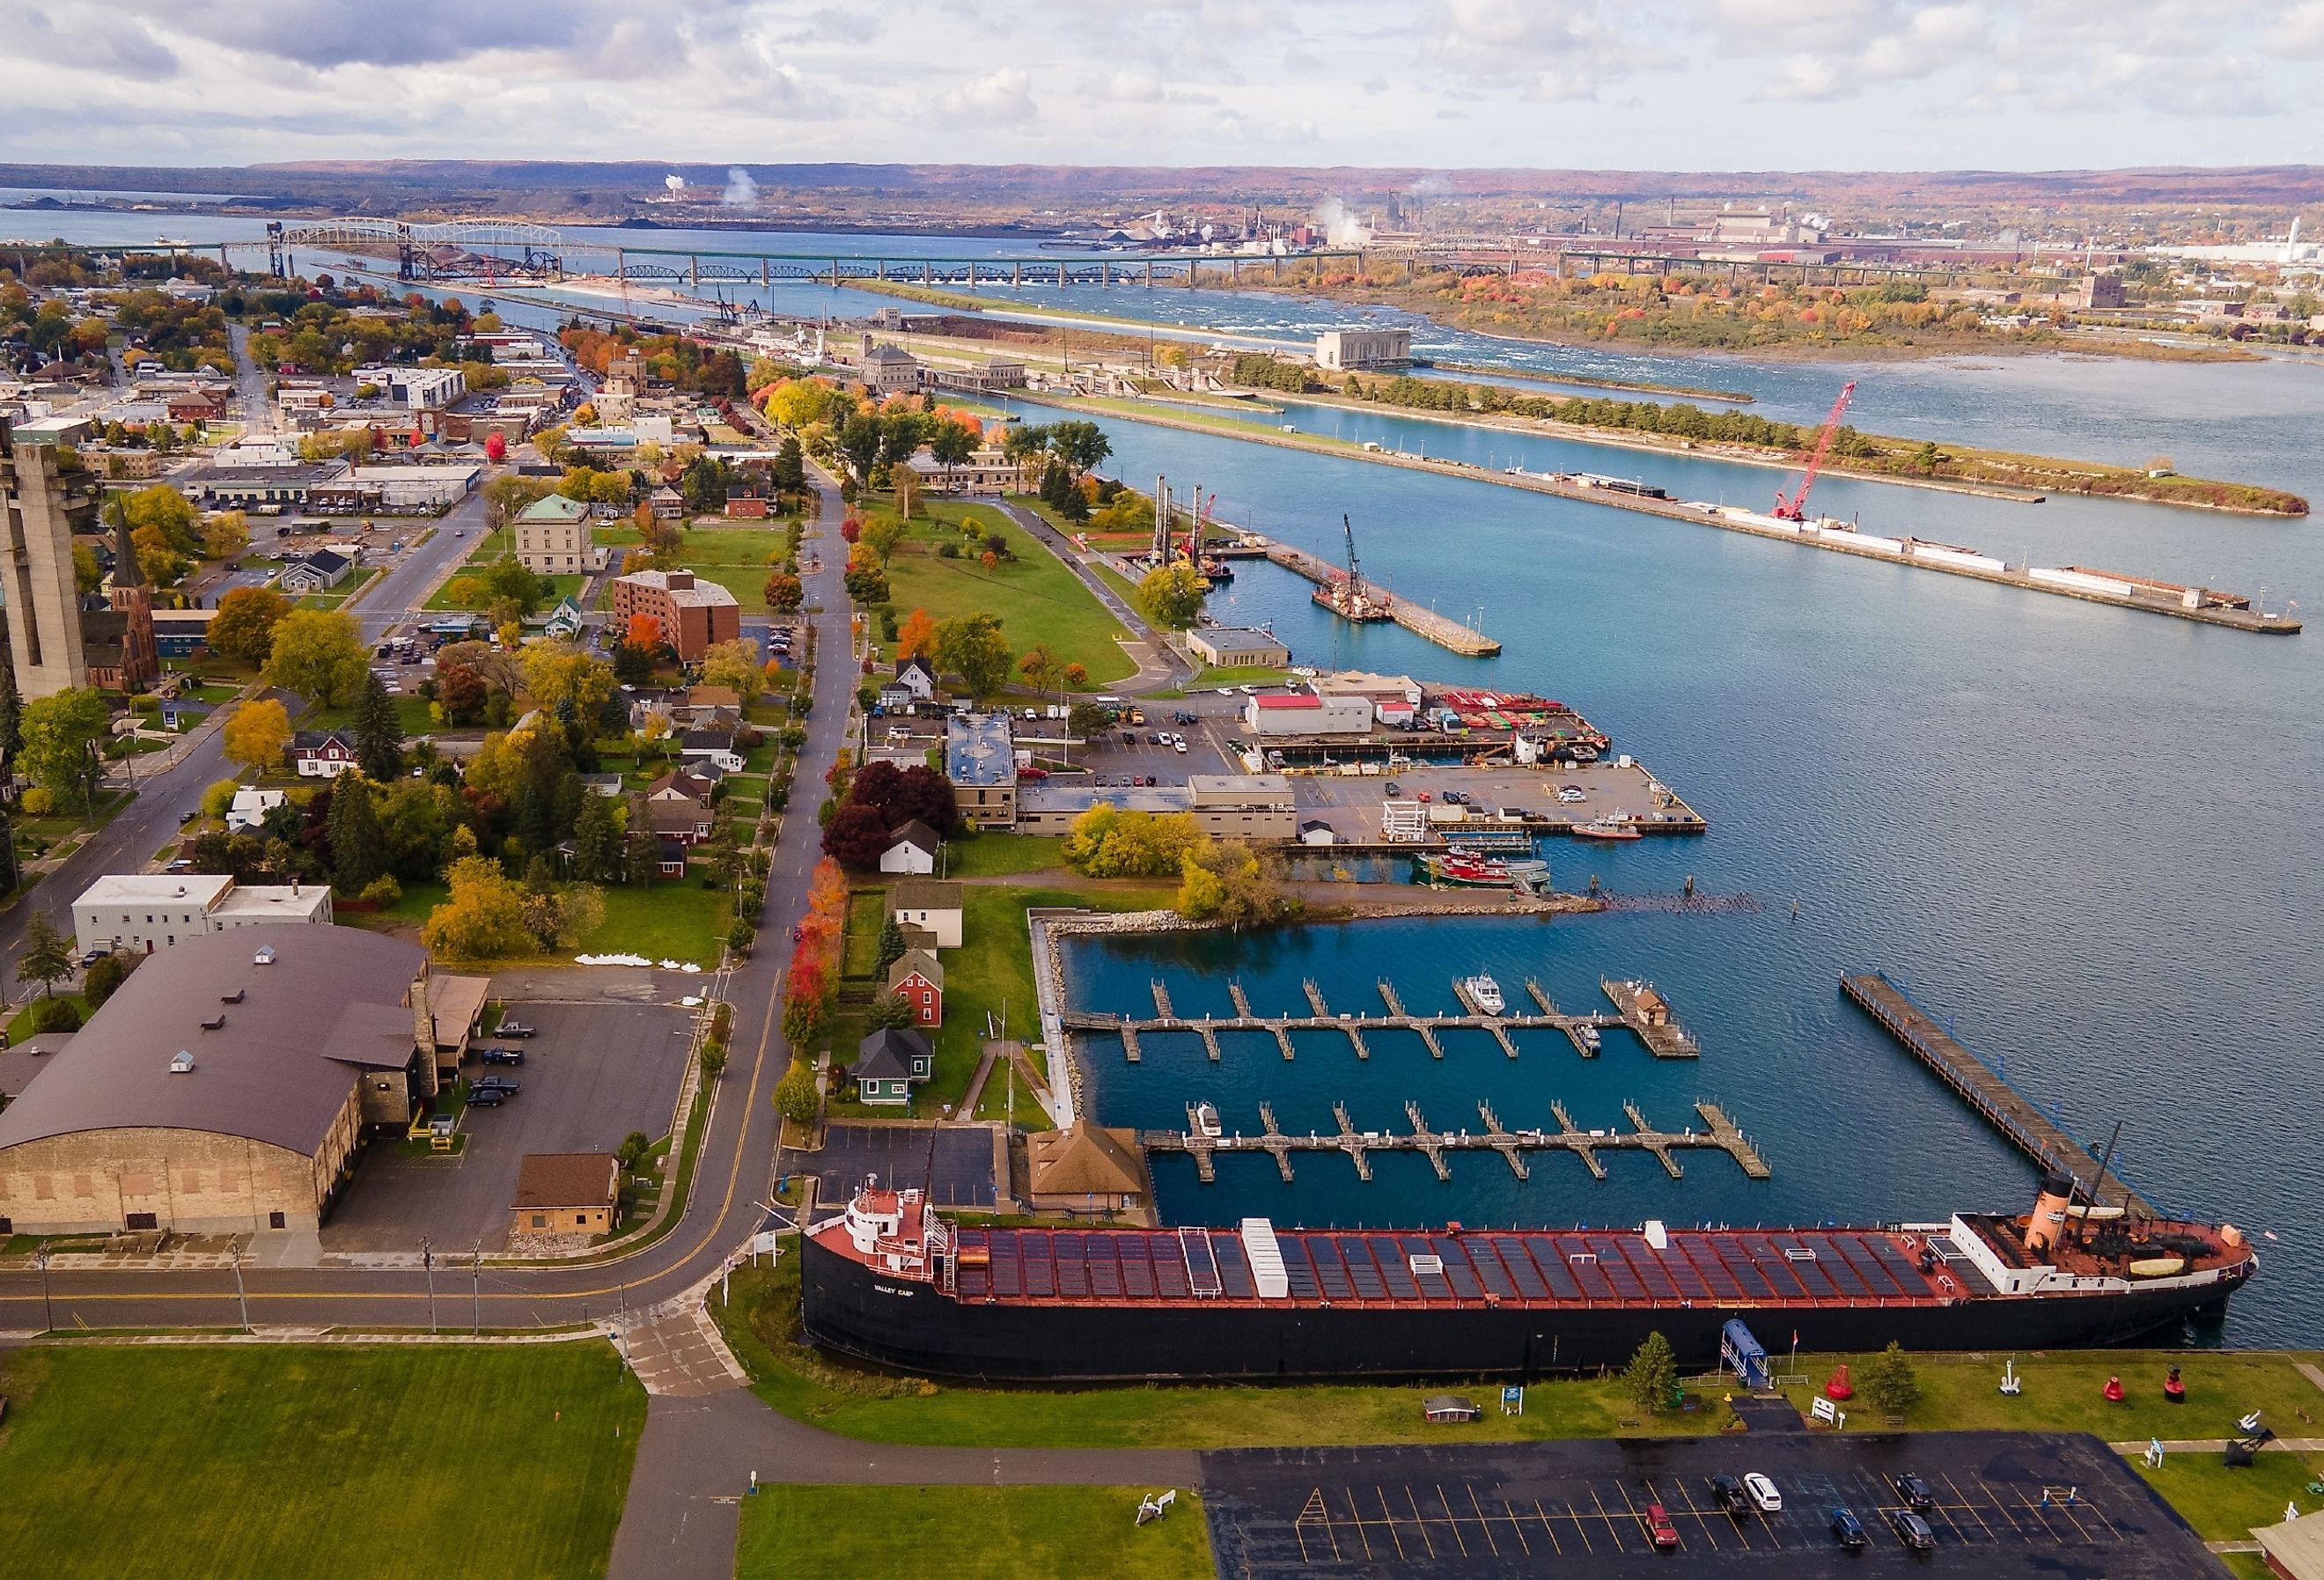 Sault Ste. Marie has a rich, long history as the gateway to Lake